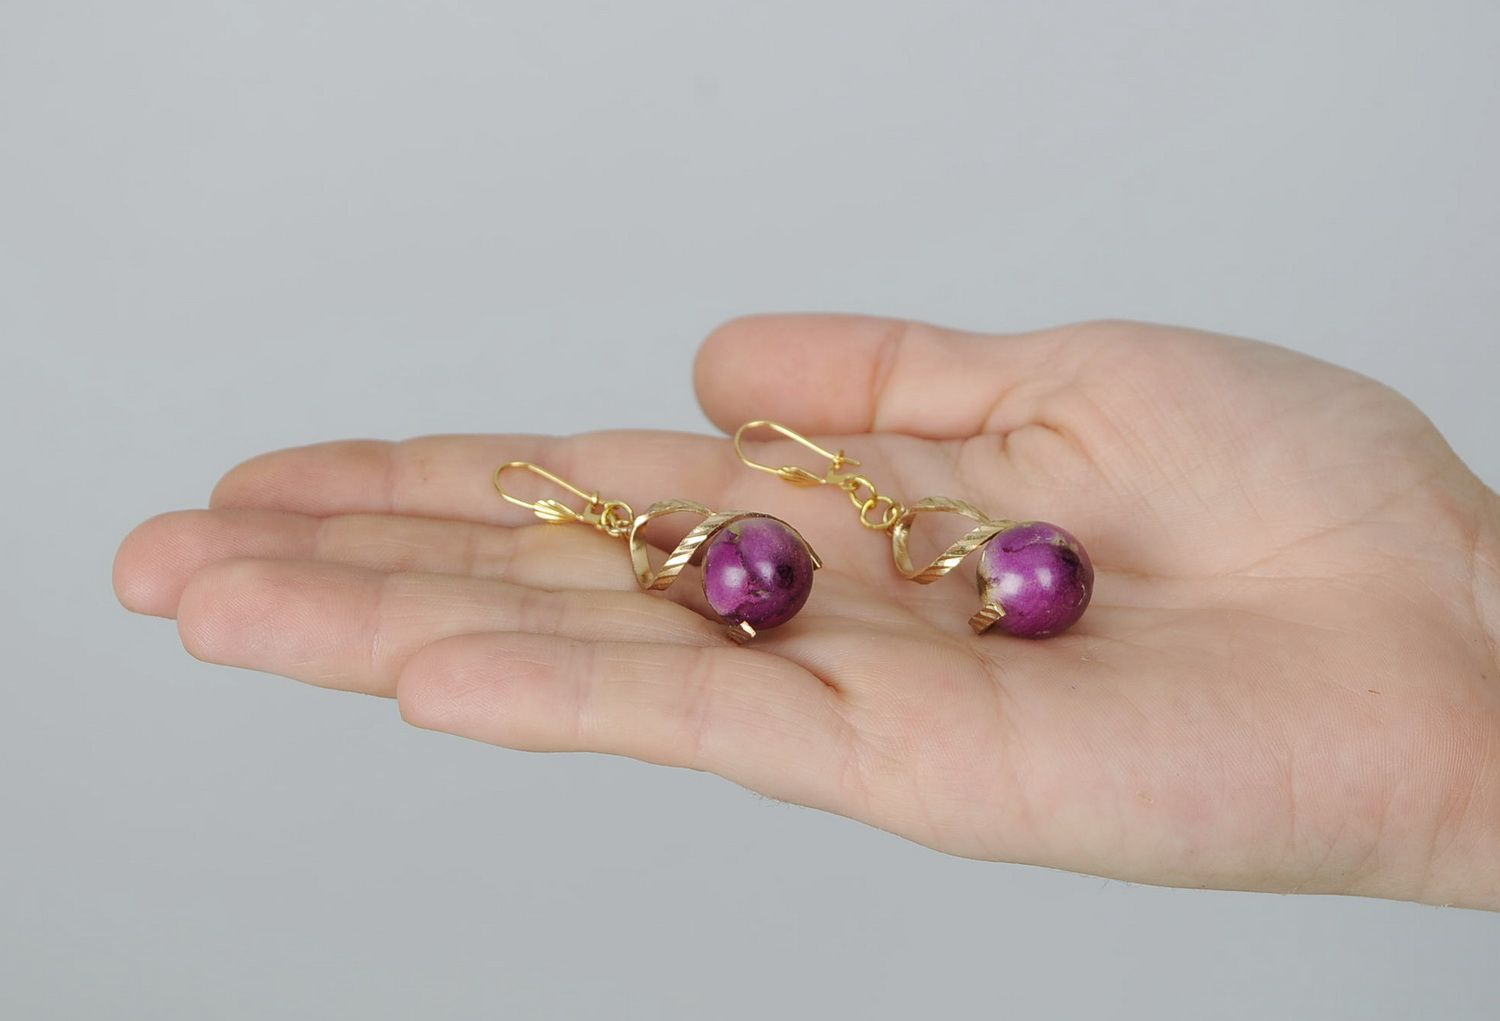 Golden earrings made from rose buds photo 5